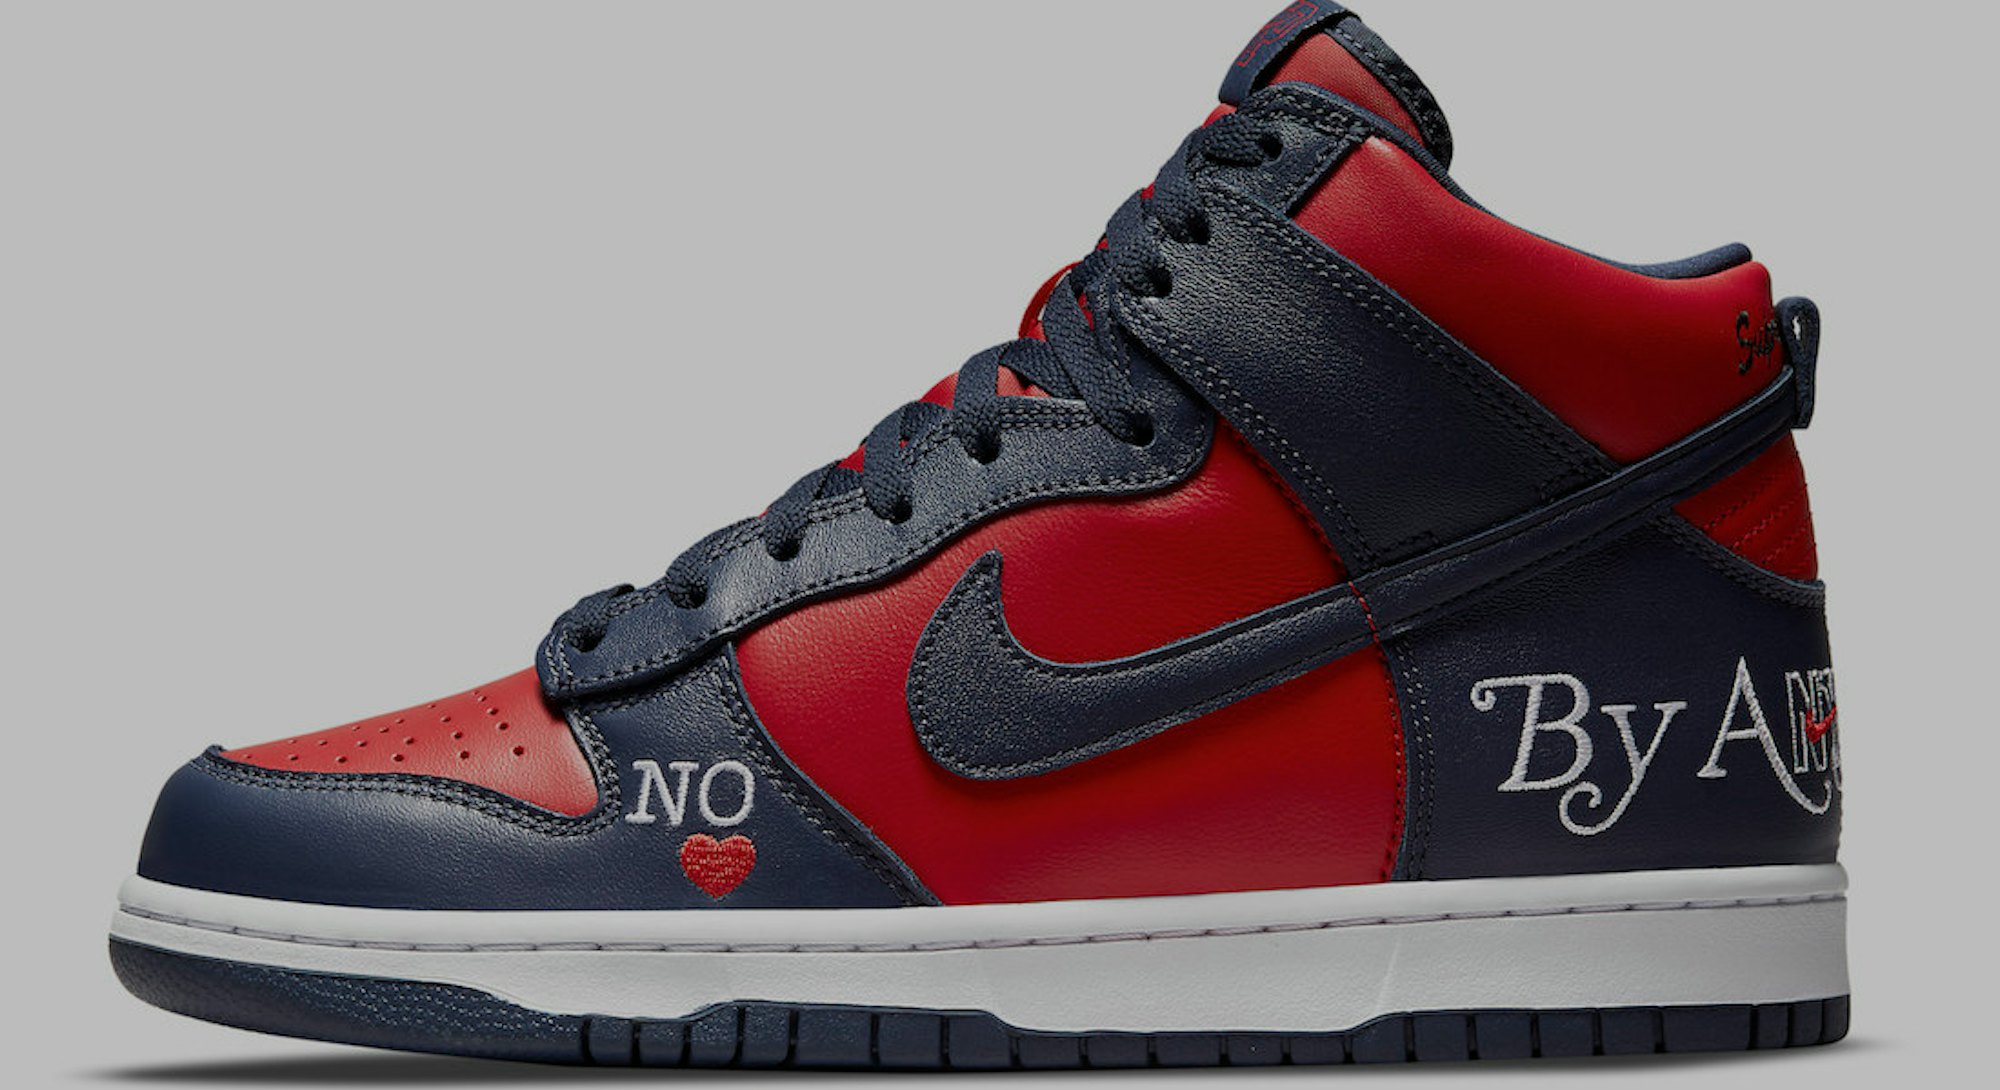 Here's every unreleased Nike Dunk sneaker dropping soon